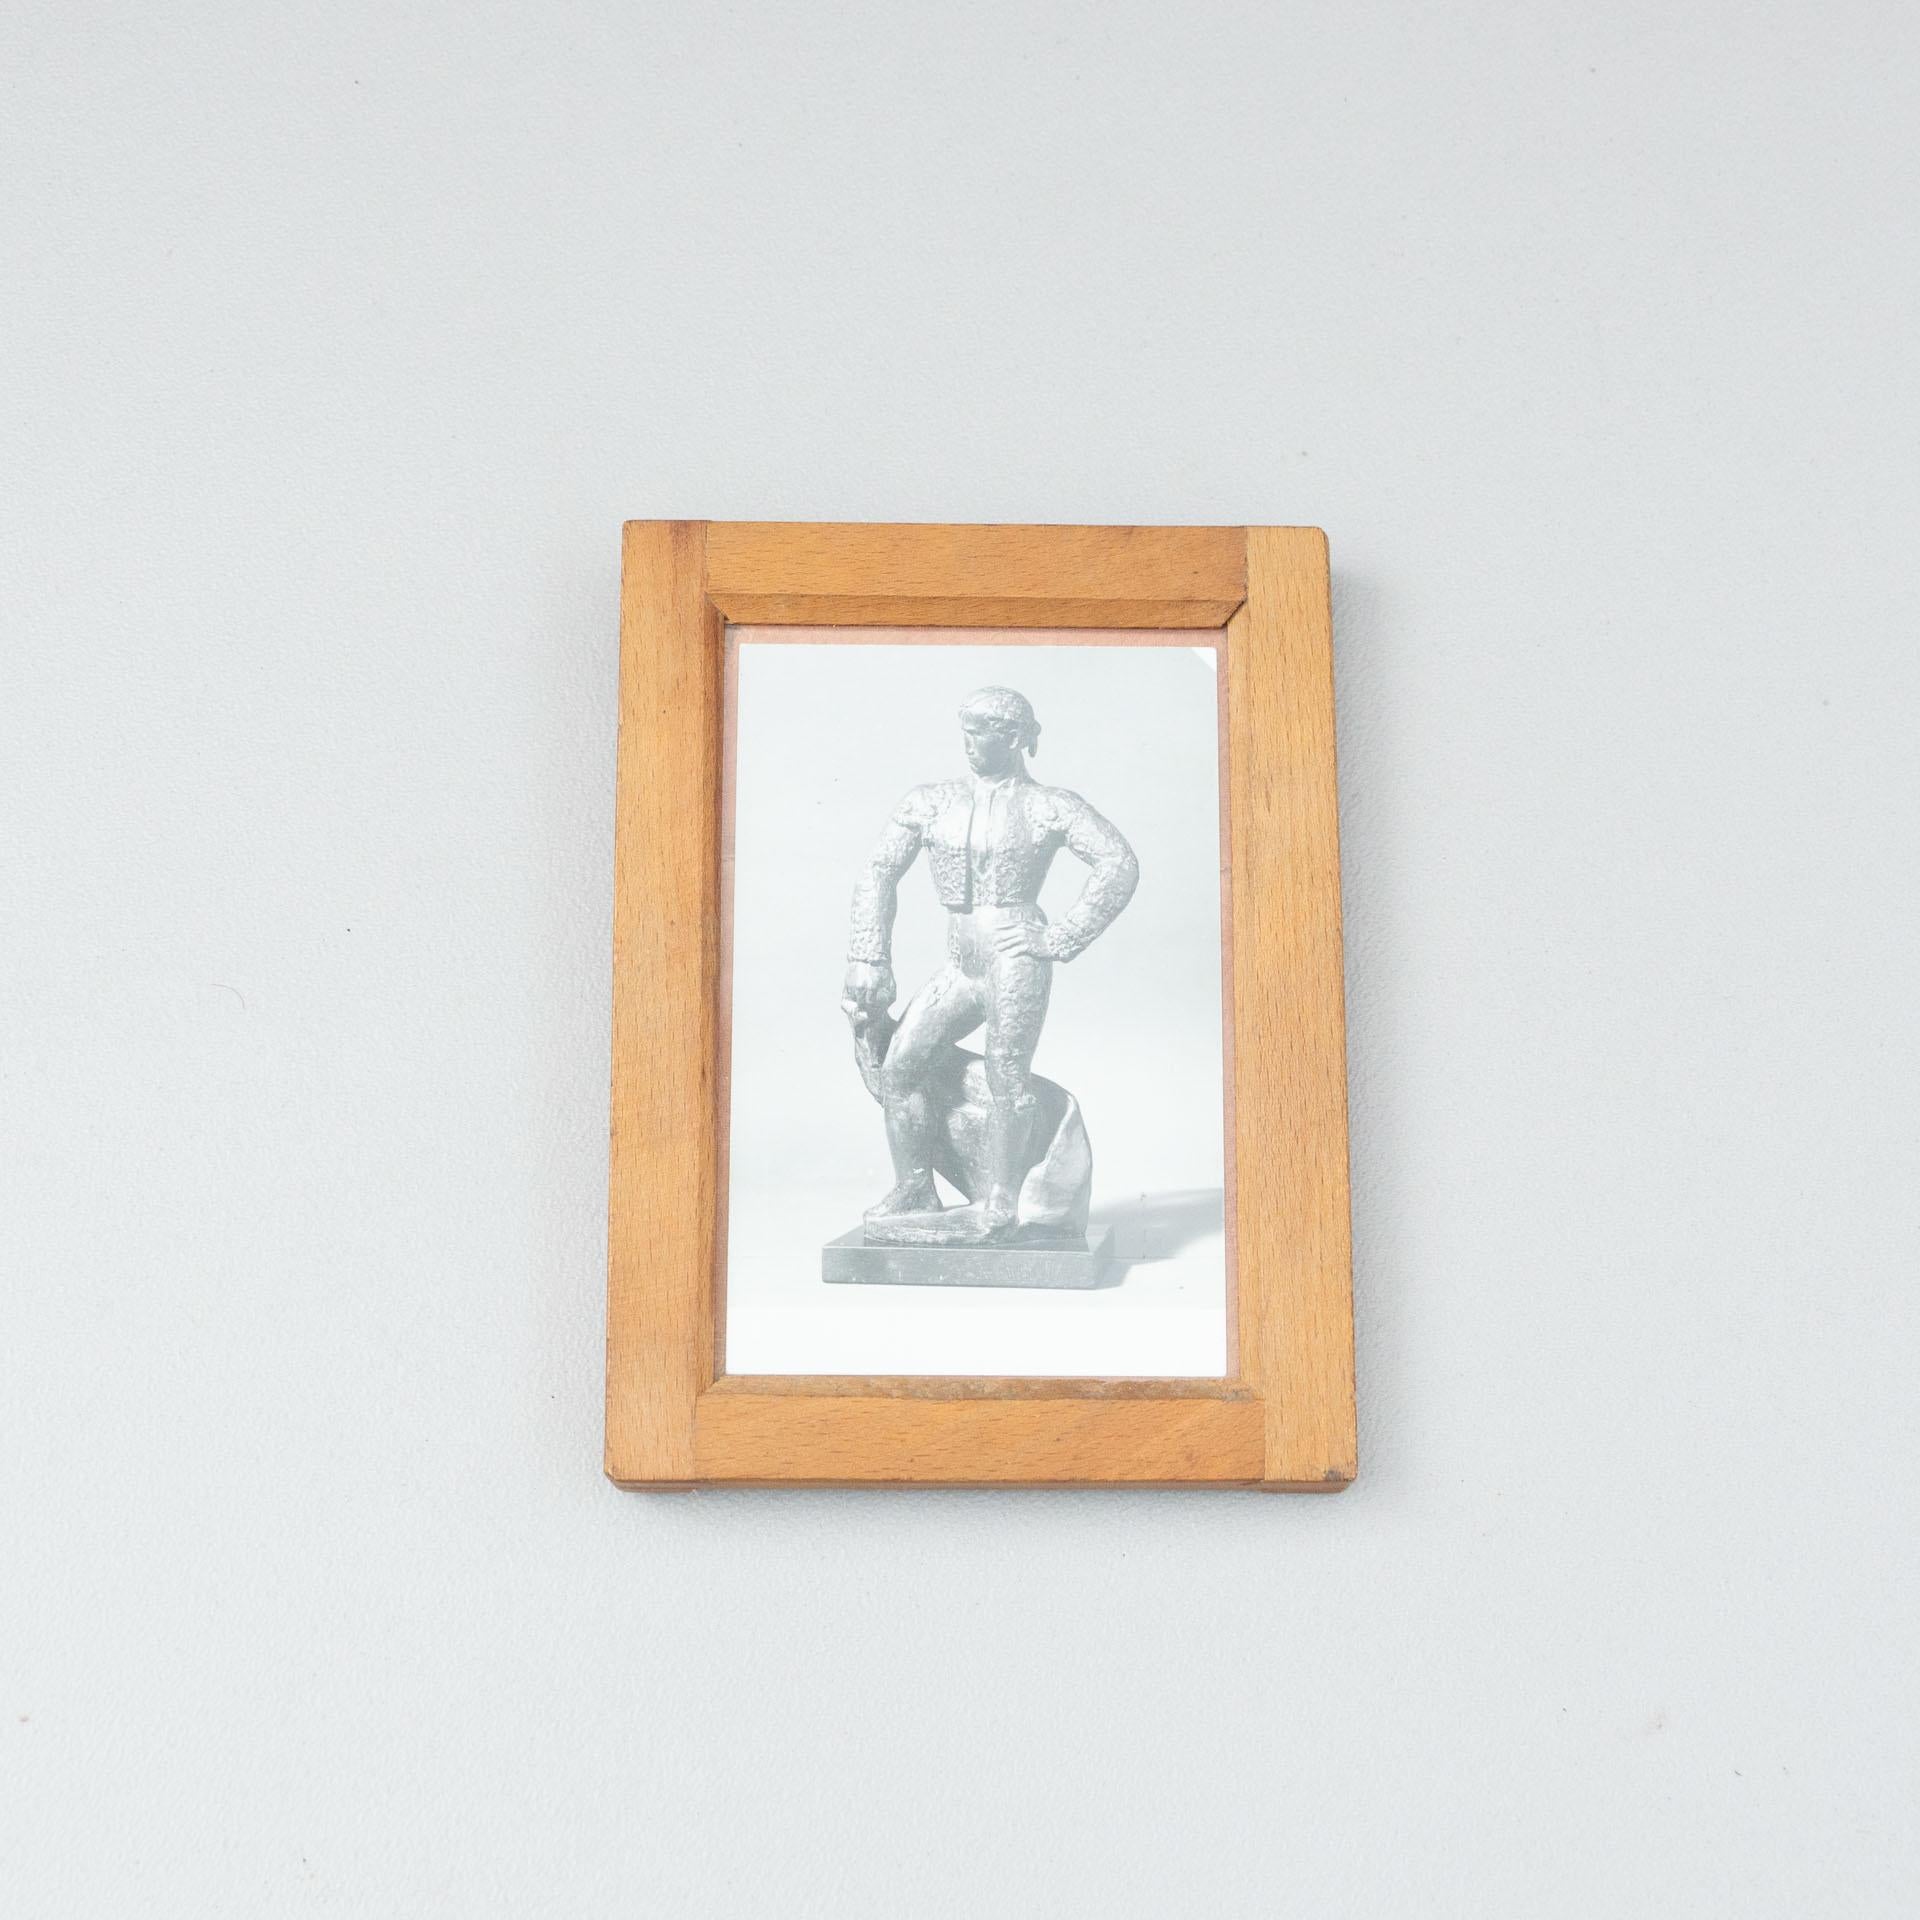 Manolo Hugué archive photography of sculpture.
Printed, circa 1960.
Wood frame included.

Materials:
Gelatin silver bromide print

Dimensions:
D 1.5 cm x W 13.5 cm x H 18.5 cm

We offer free worldwide shipping for this piece.